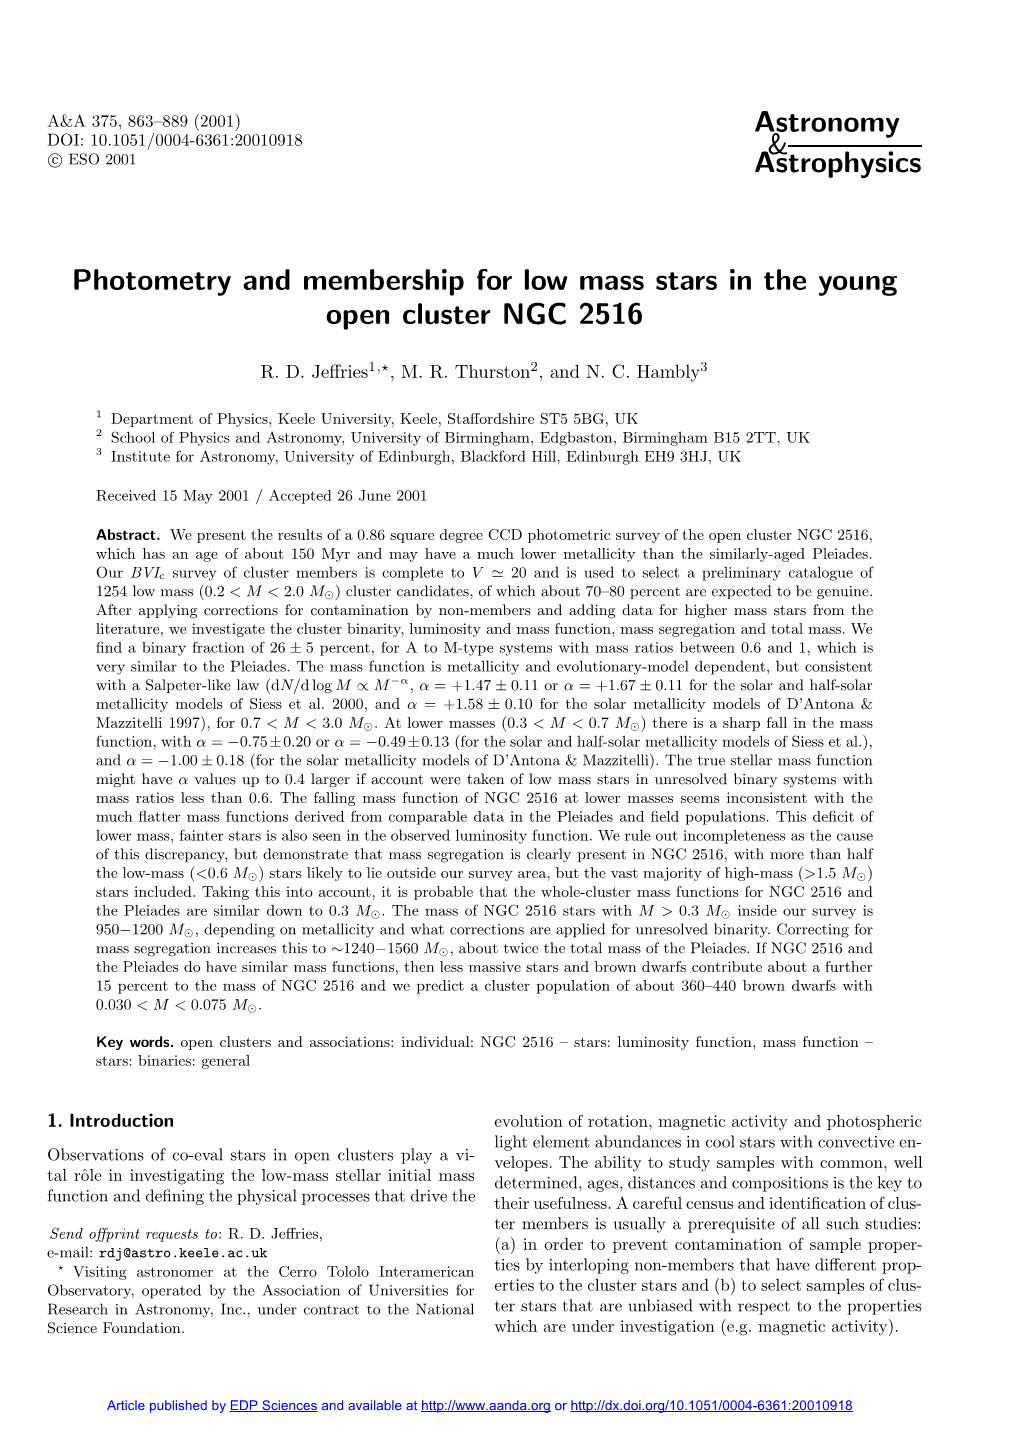 Photometry and Membership for Low Mass Stars in the Young Open Cluster NGC 2516